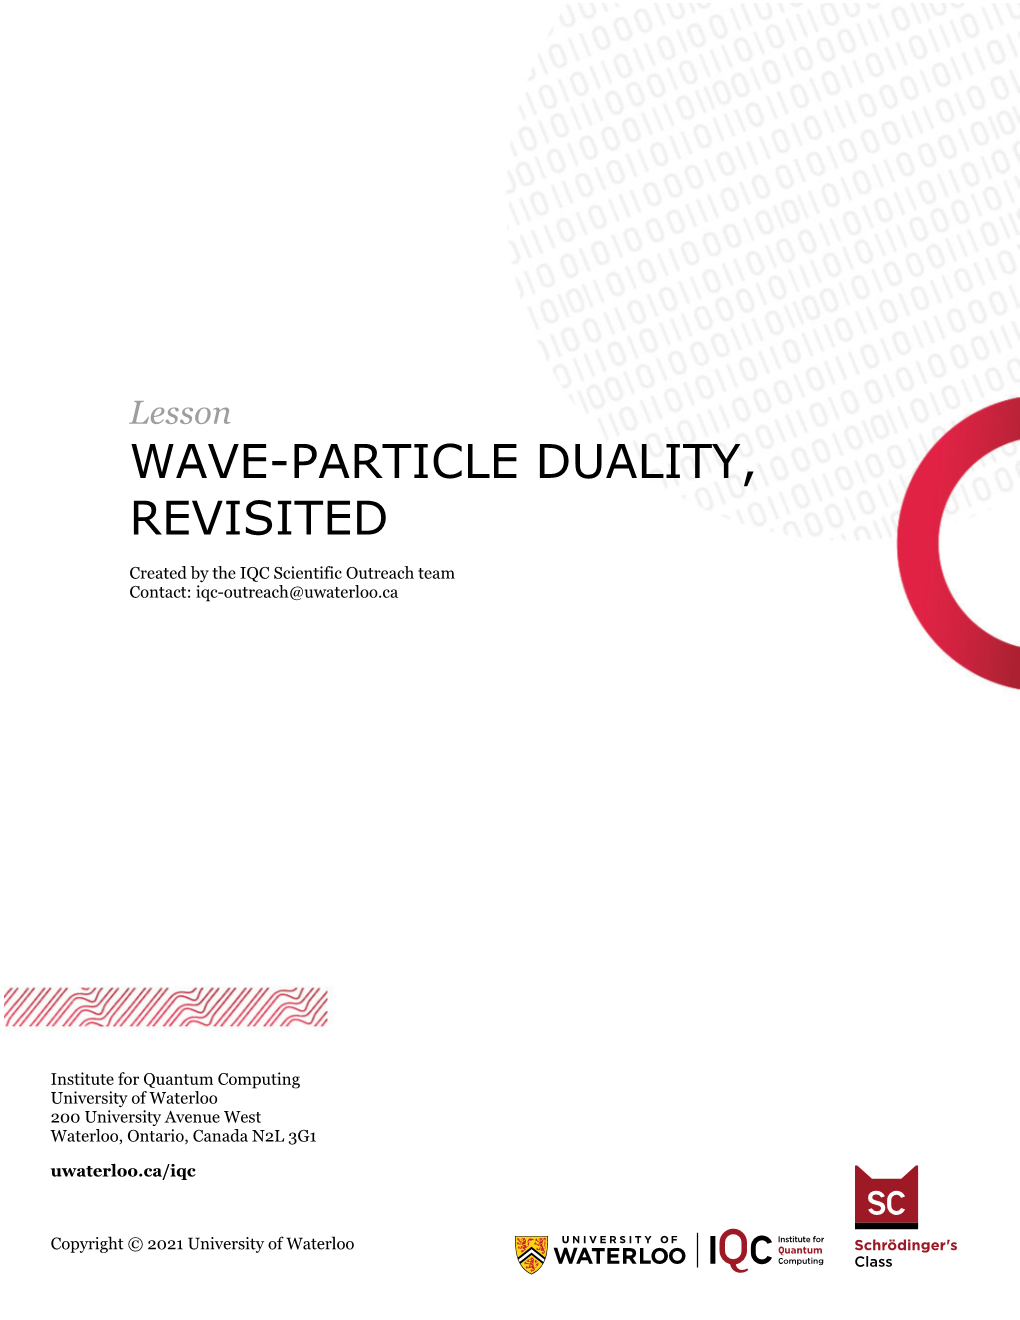 Wave-Particle Duality, Revisited